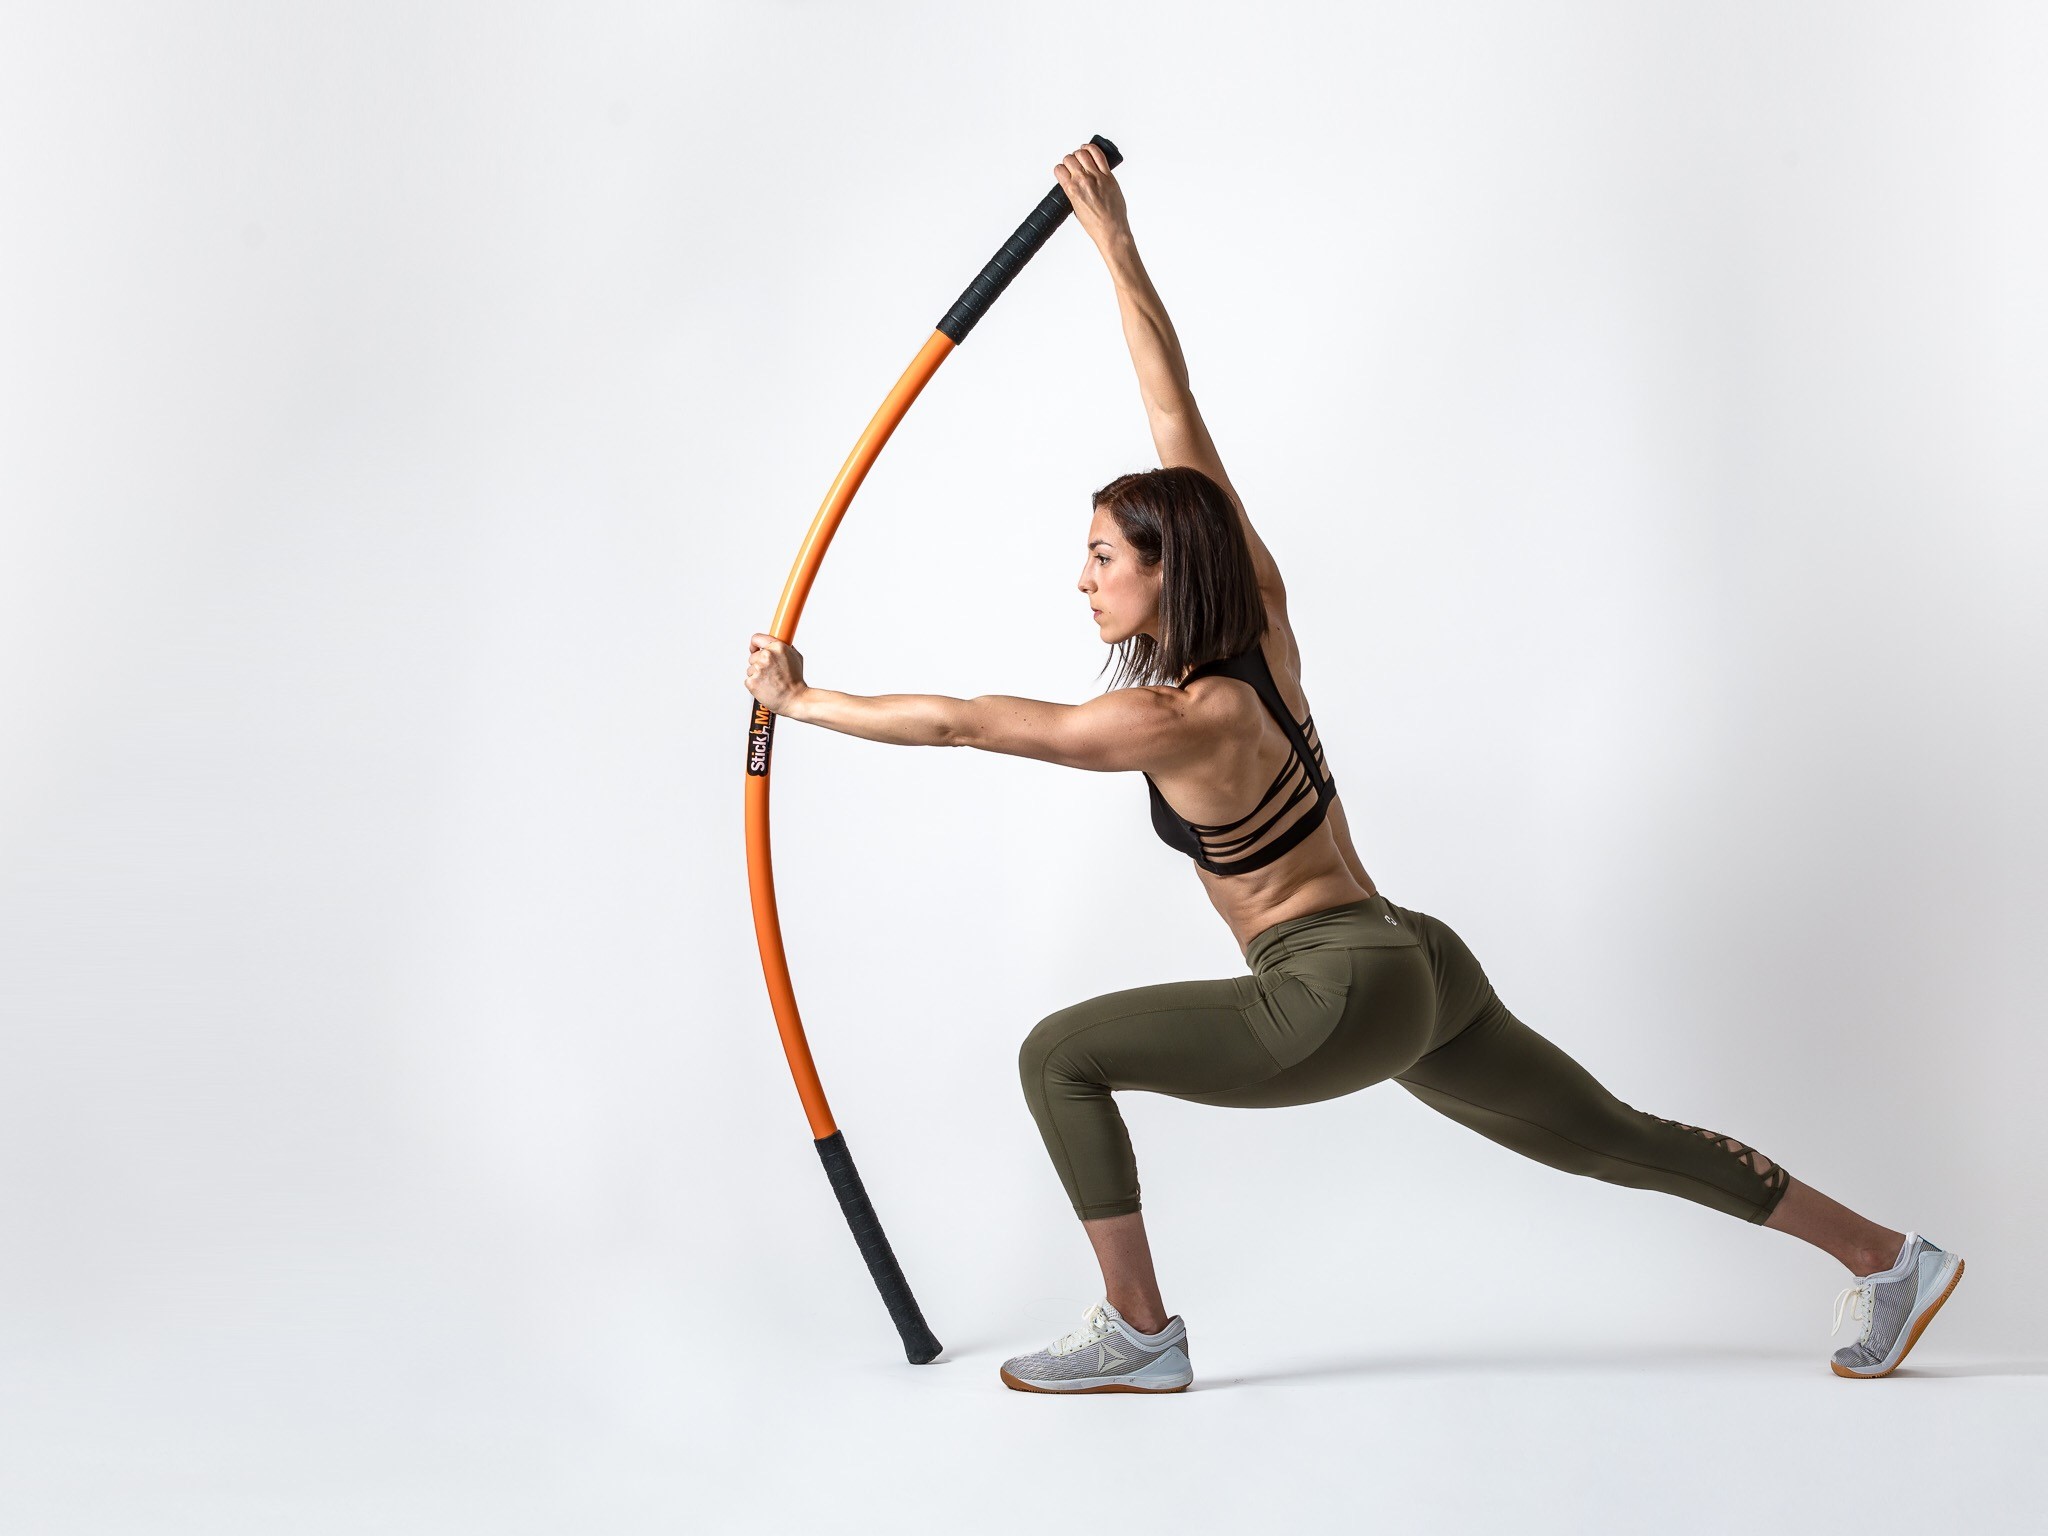 Check out what Yoga Journal thought of our Sister company Stick